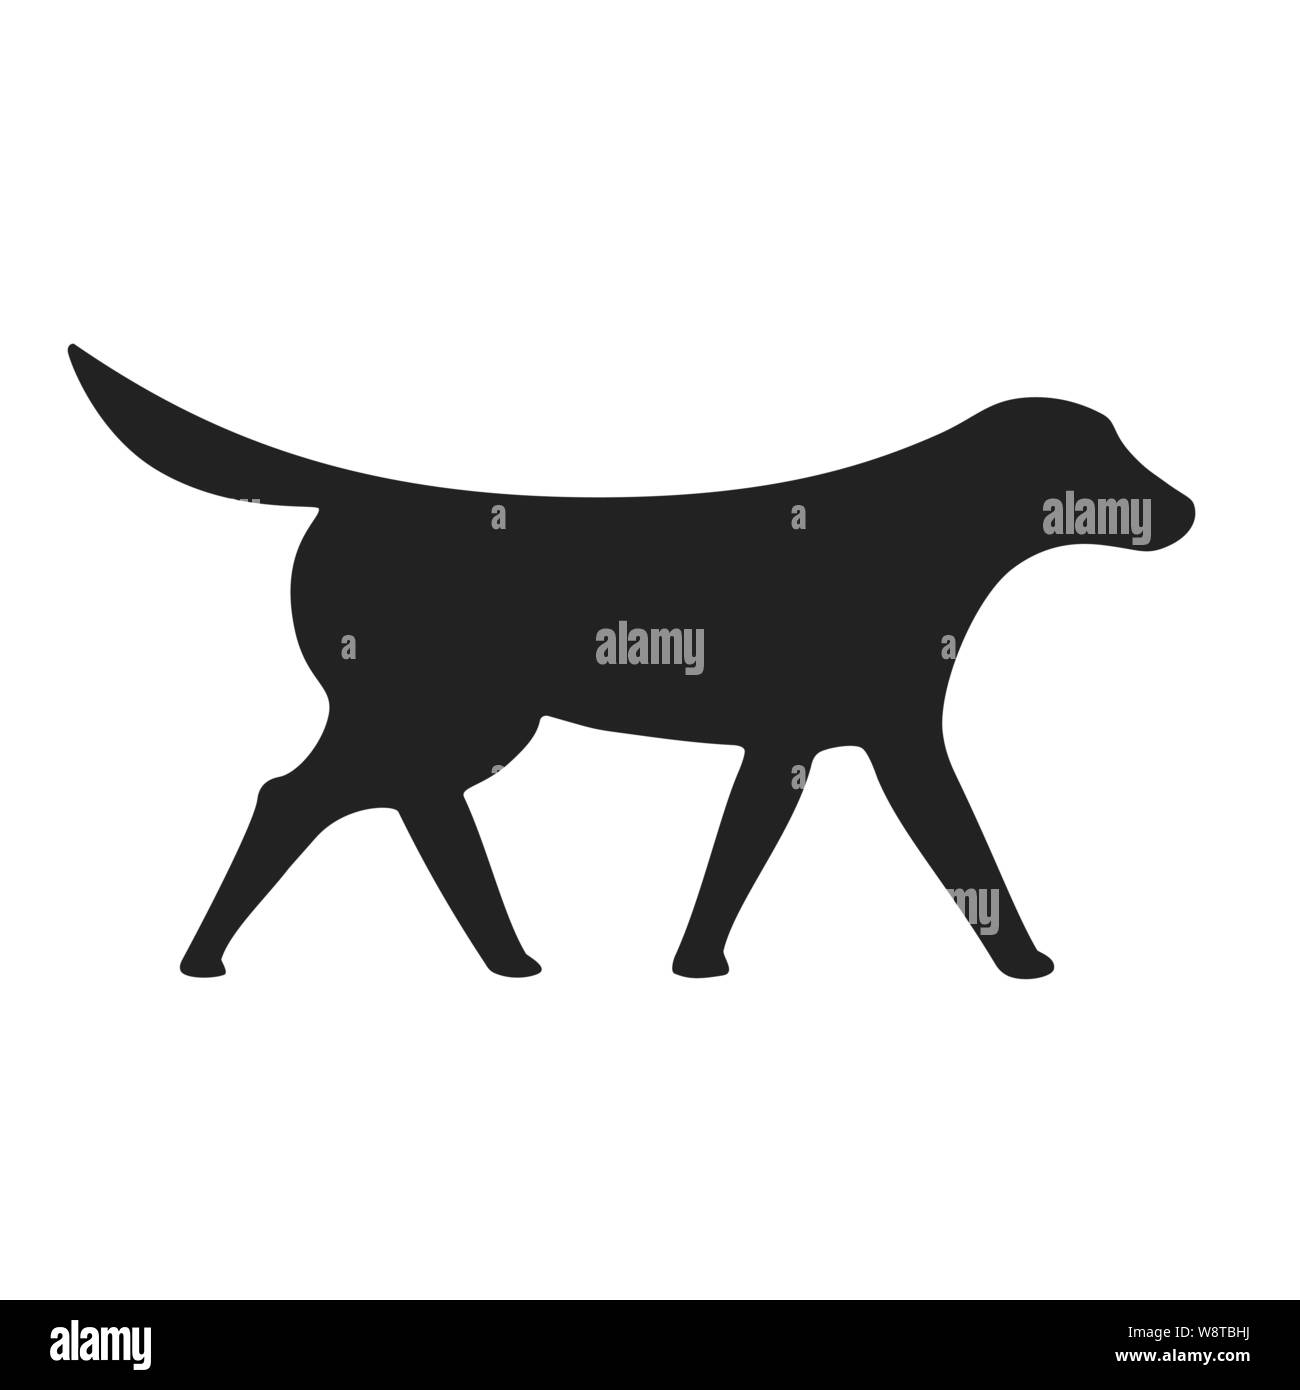 Vector illustration. Pointer dog silhouette in black isolated. Simple icon. Stock Vector